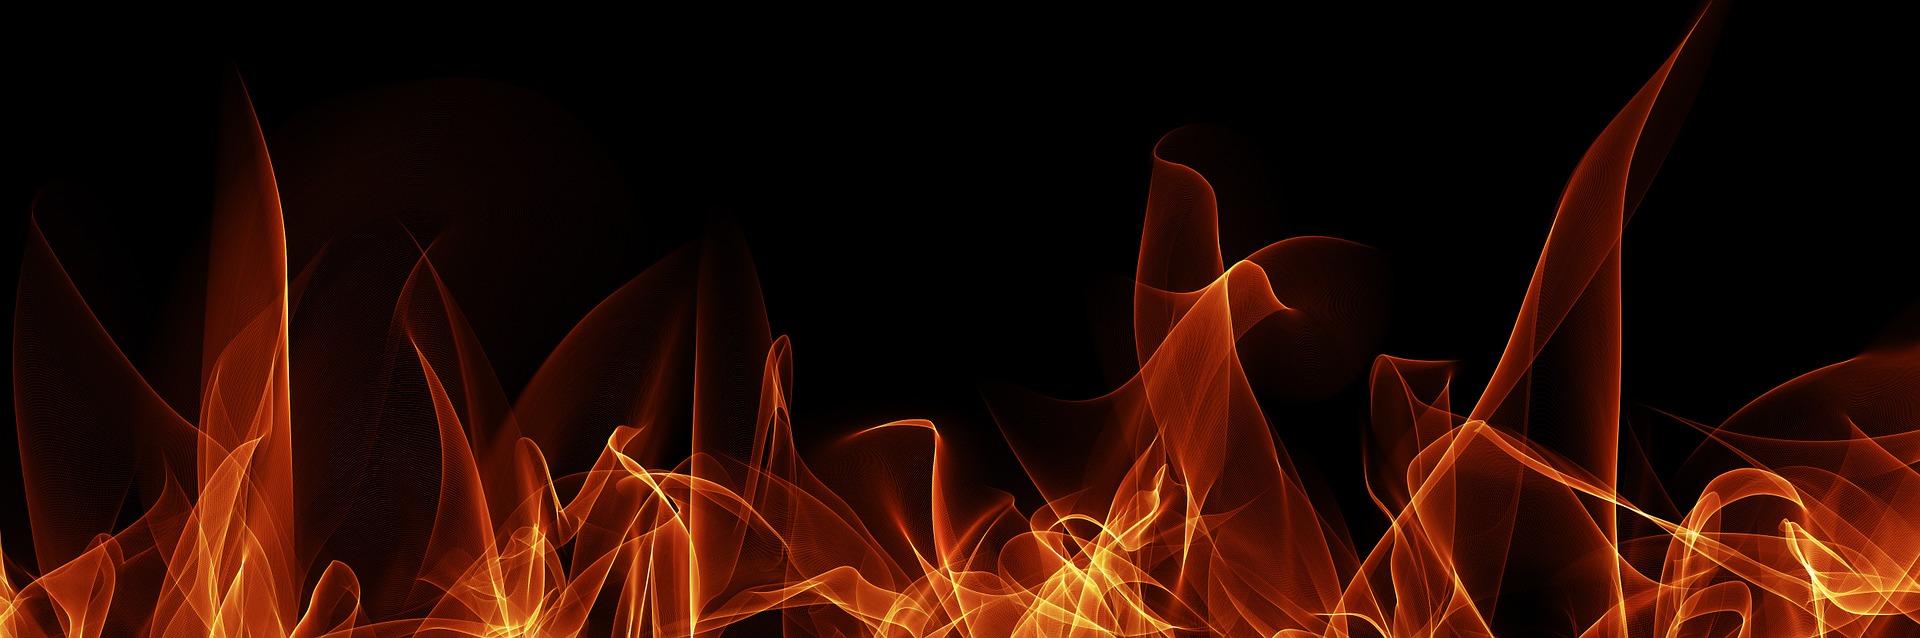 Image of Flames 1345507 1920